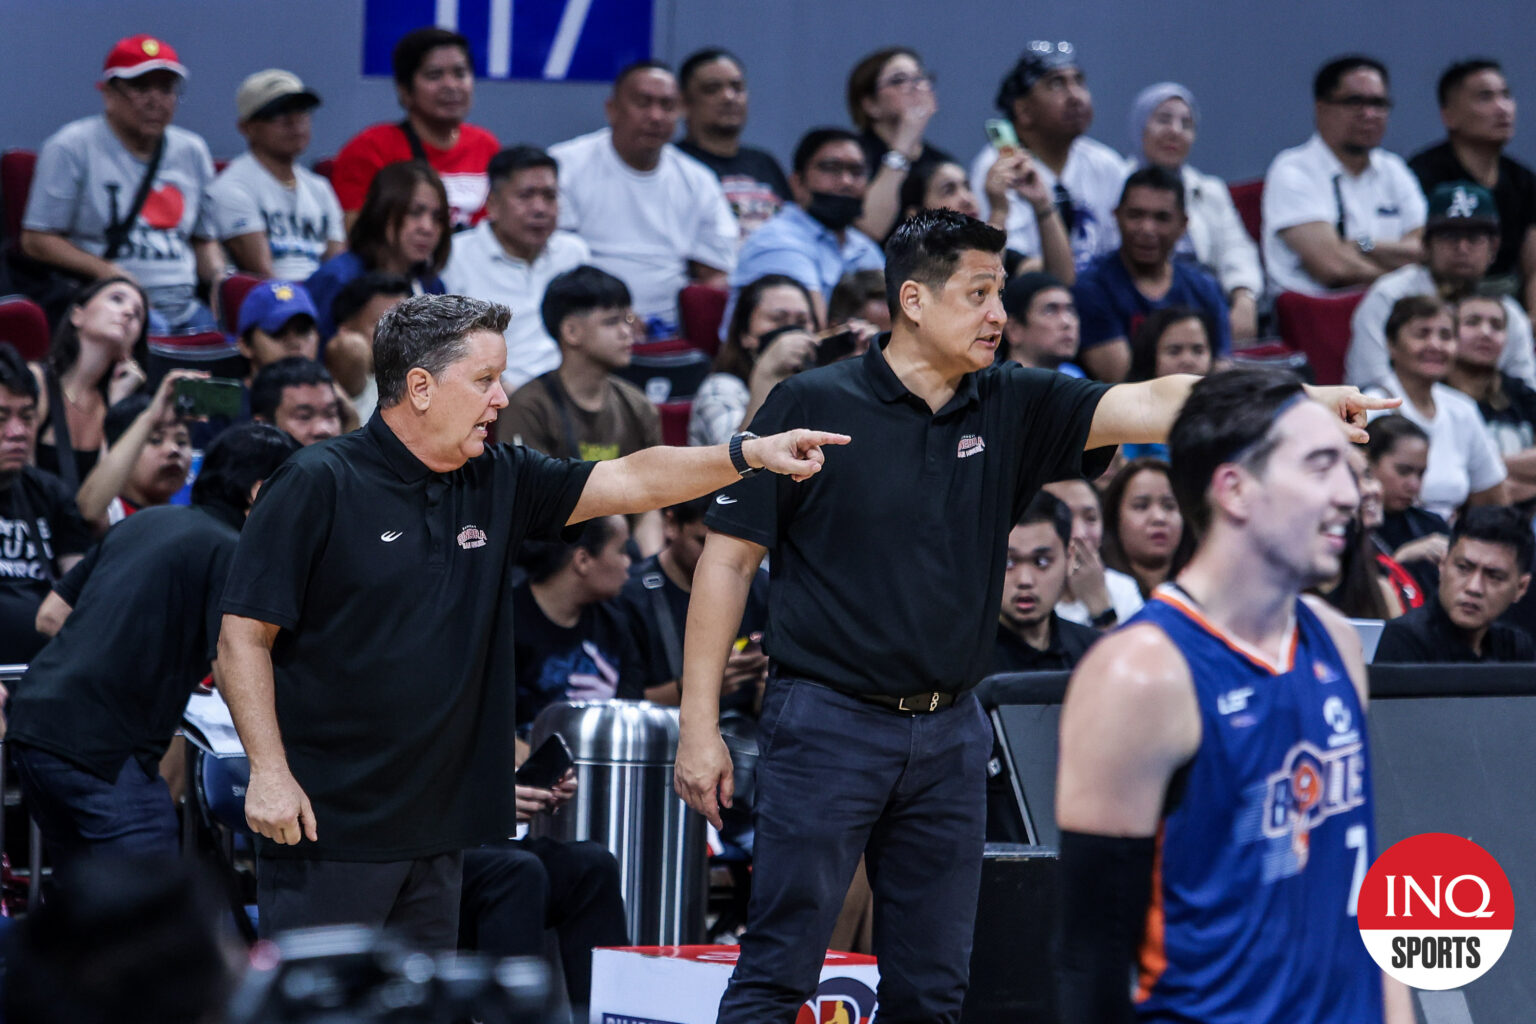 PBA: Ginebra Game 1 win fueled by abysmal loss to Meralco in elims